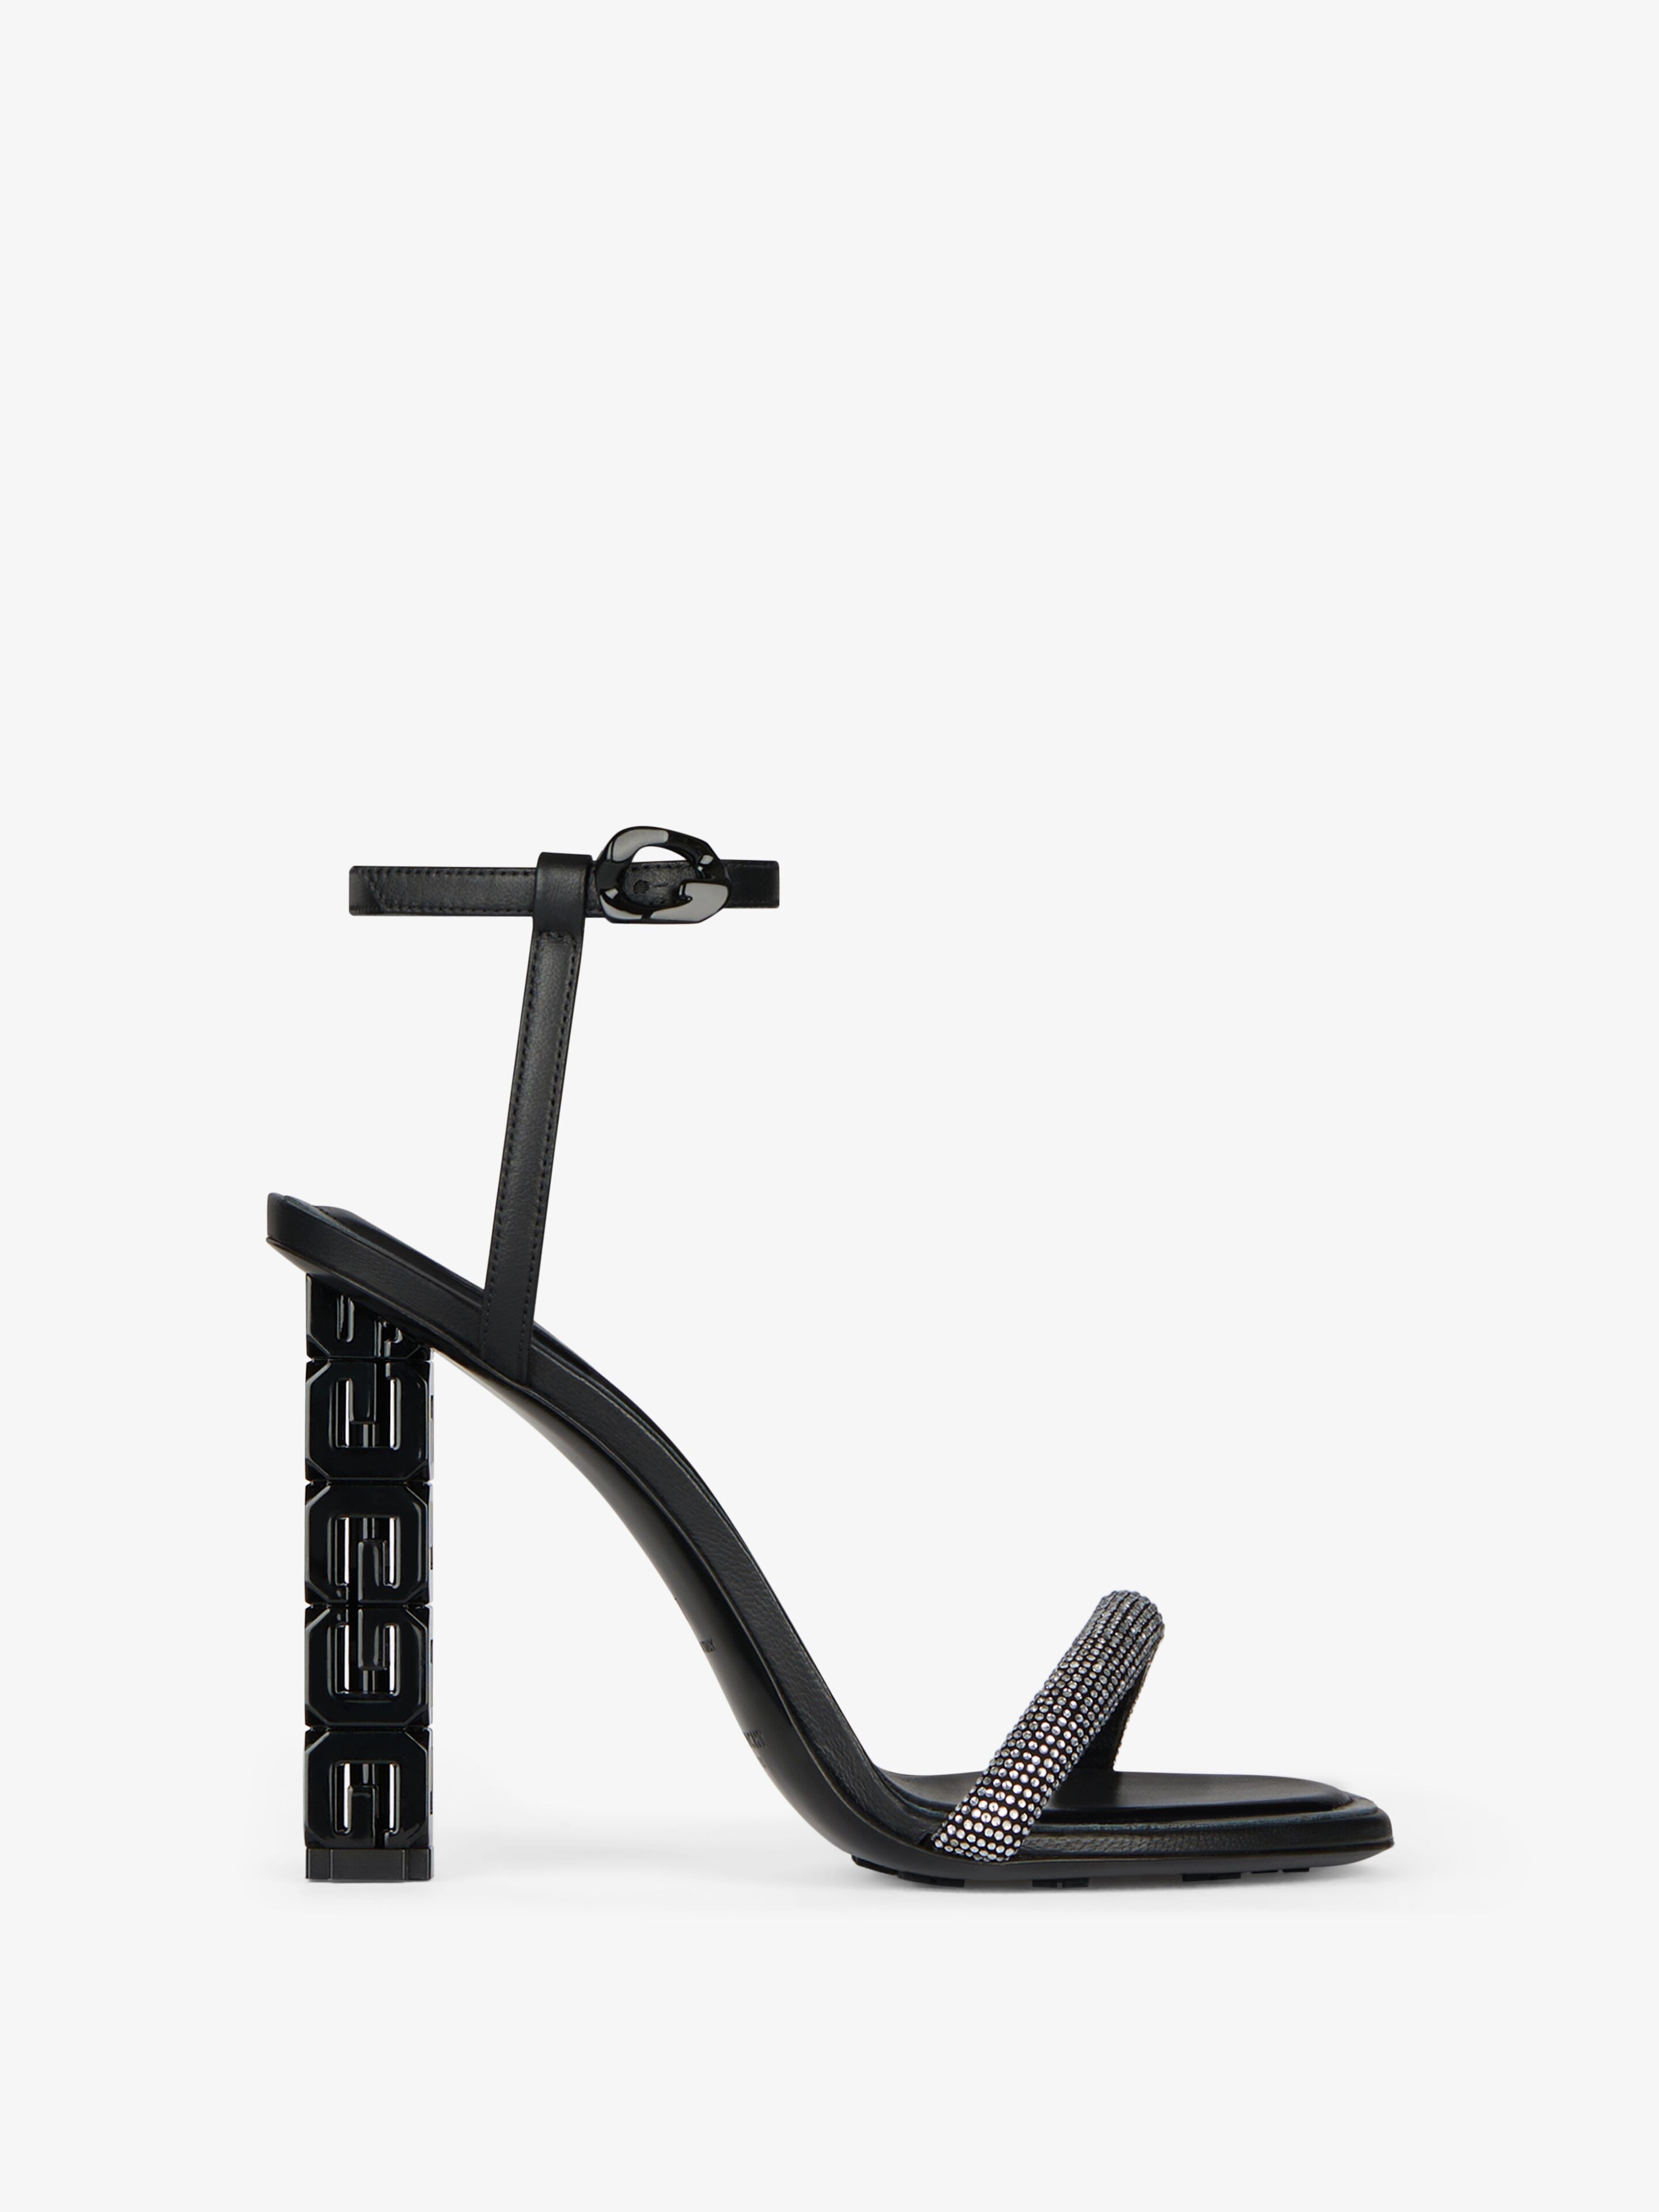 G Cube sandals in leather - black/silvery